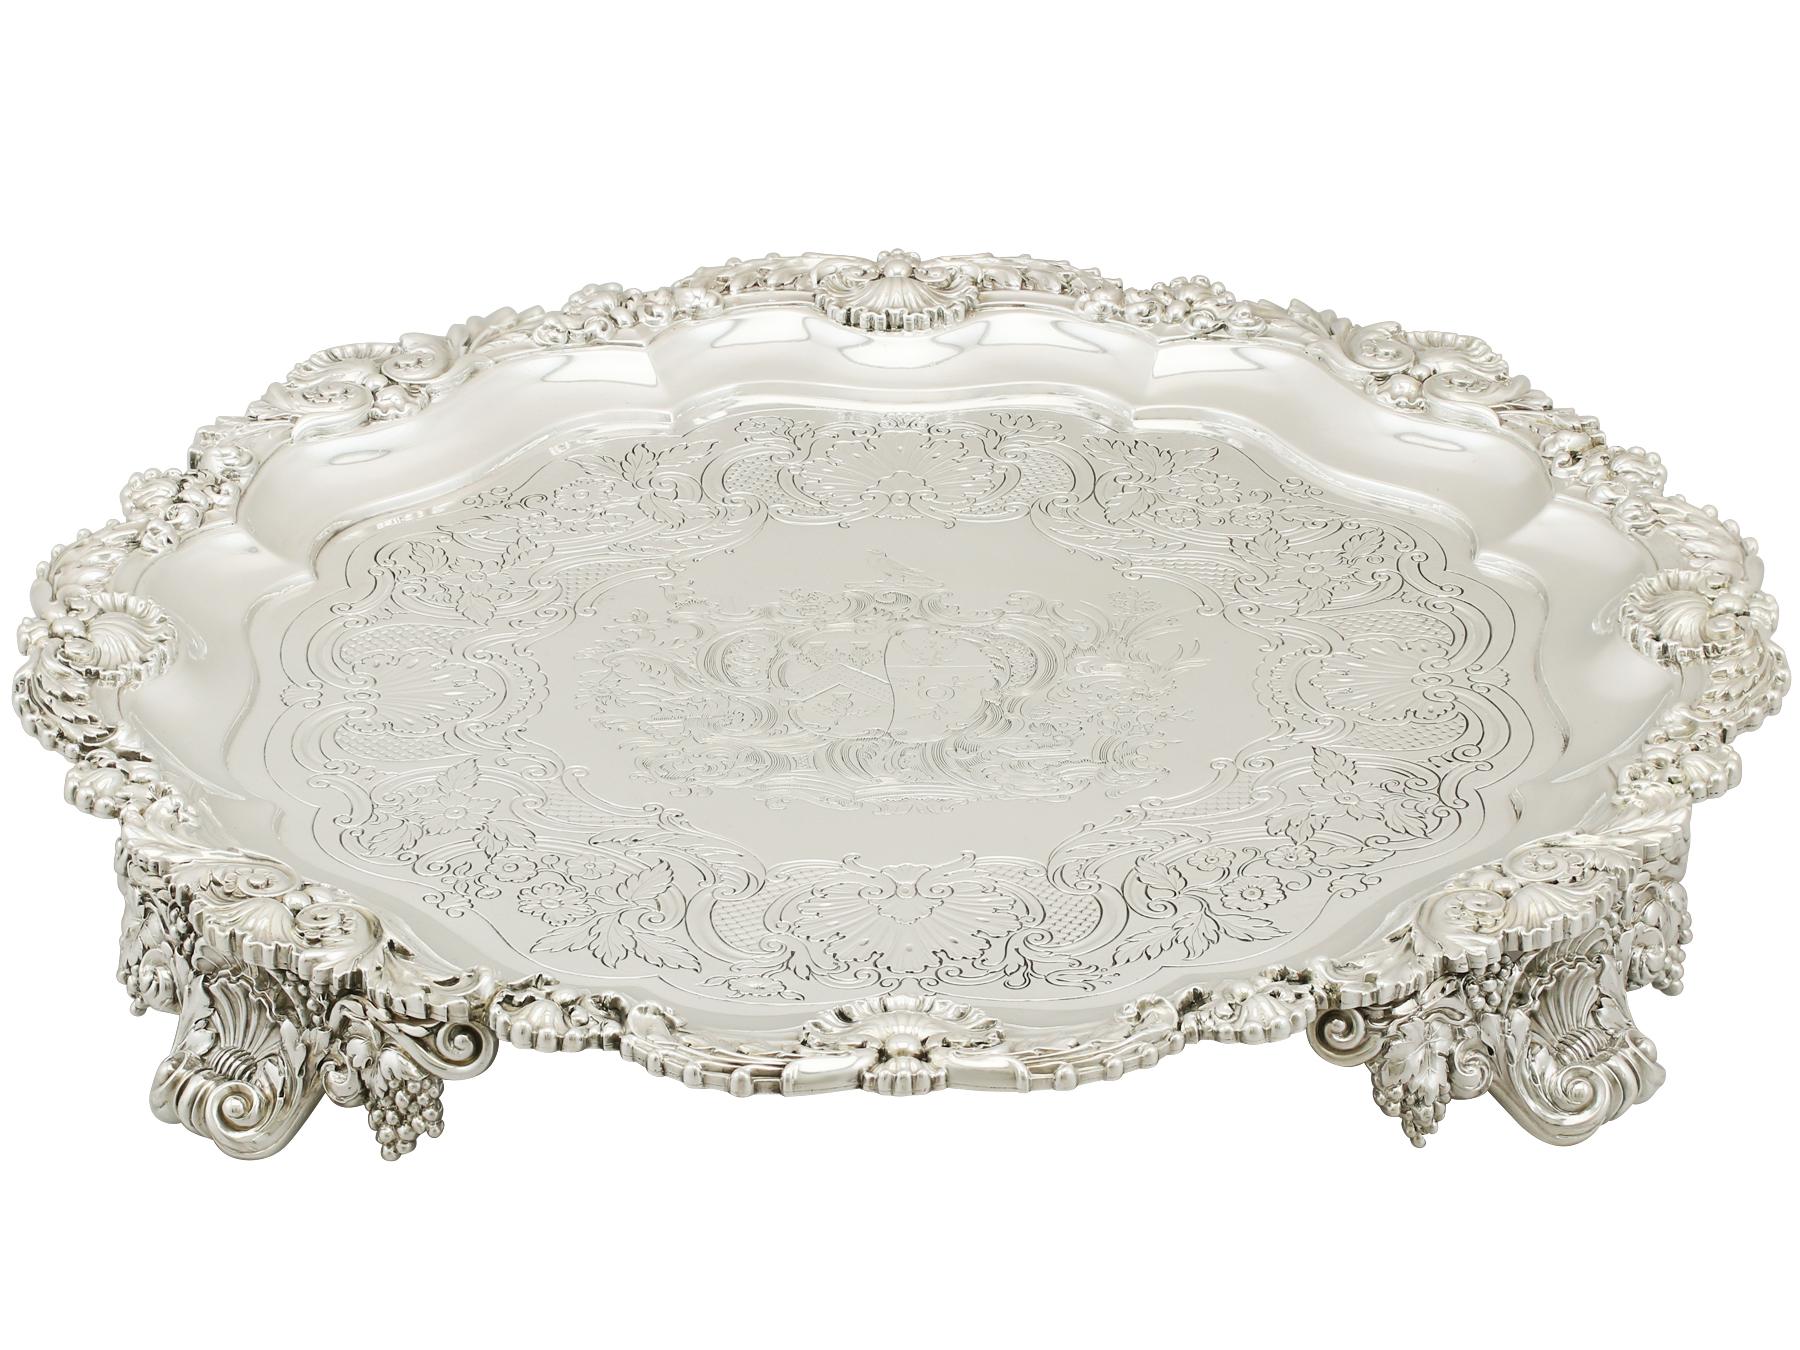 A magnificent, fine and impressive antique George III English sterling silver salver made by Paul Storr; an addition to our range of collectable silverware.

This magnificent antique George III sterling silver salver has a circular shaped